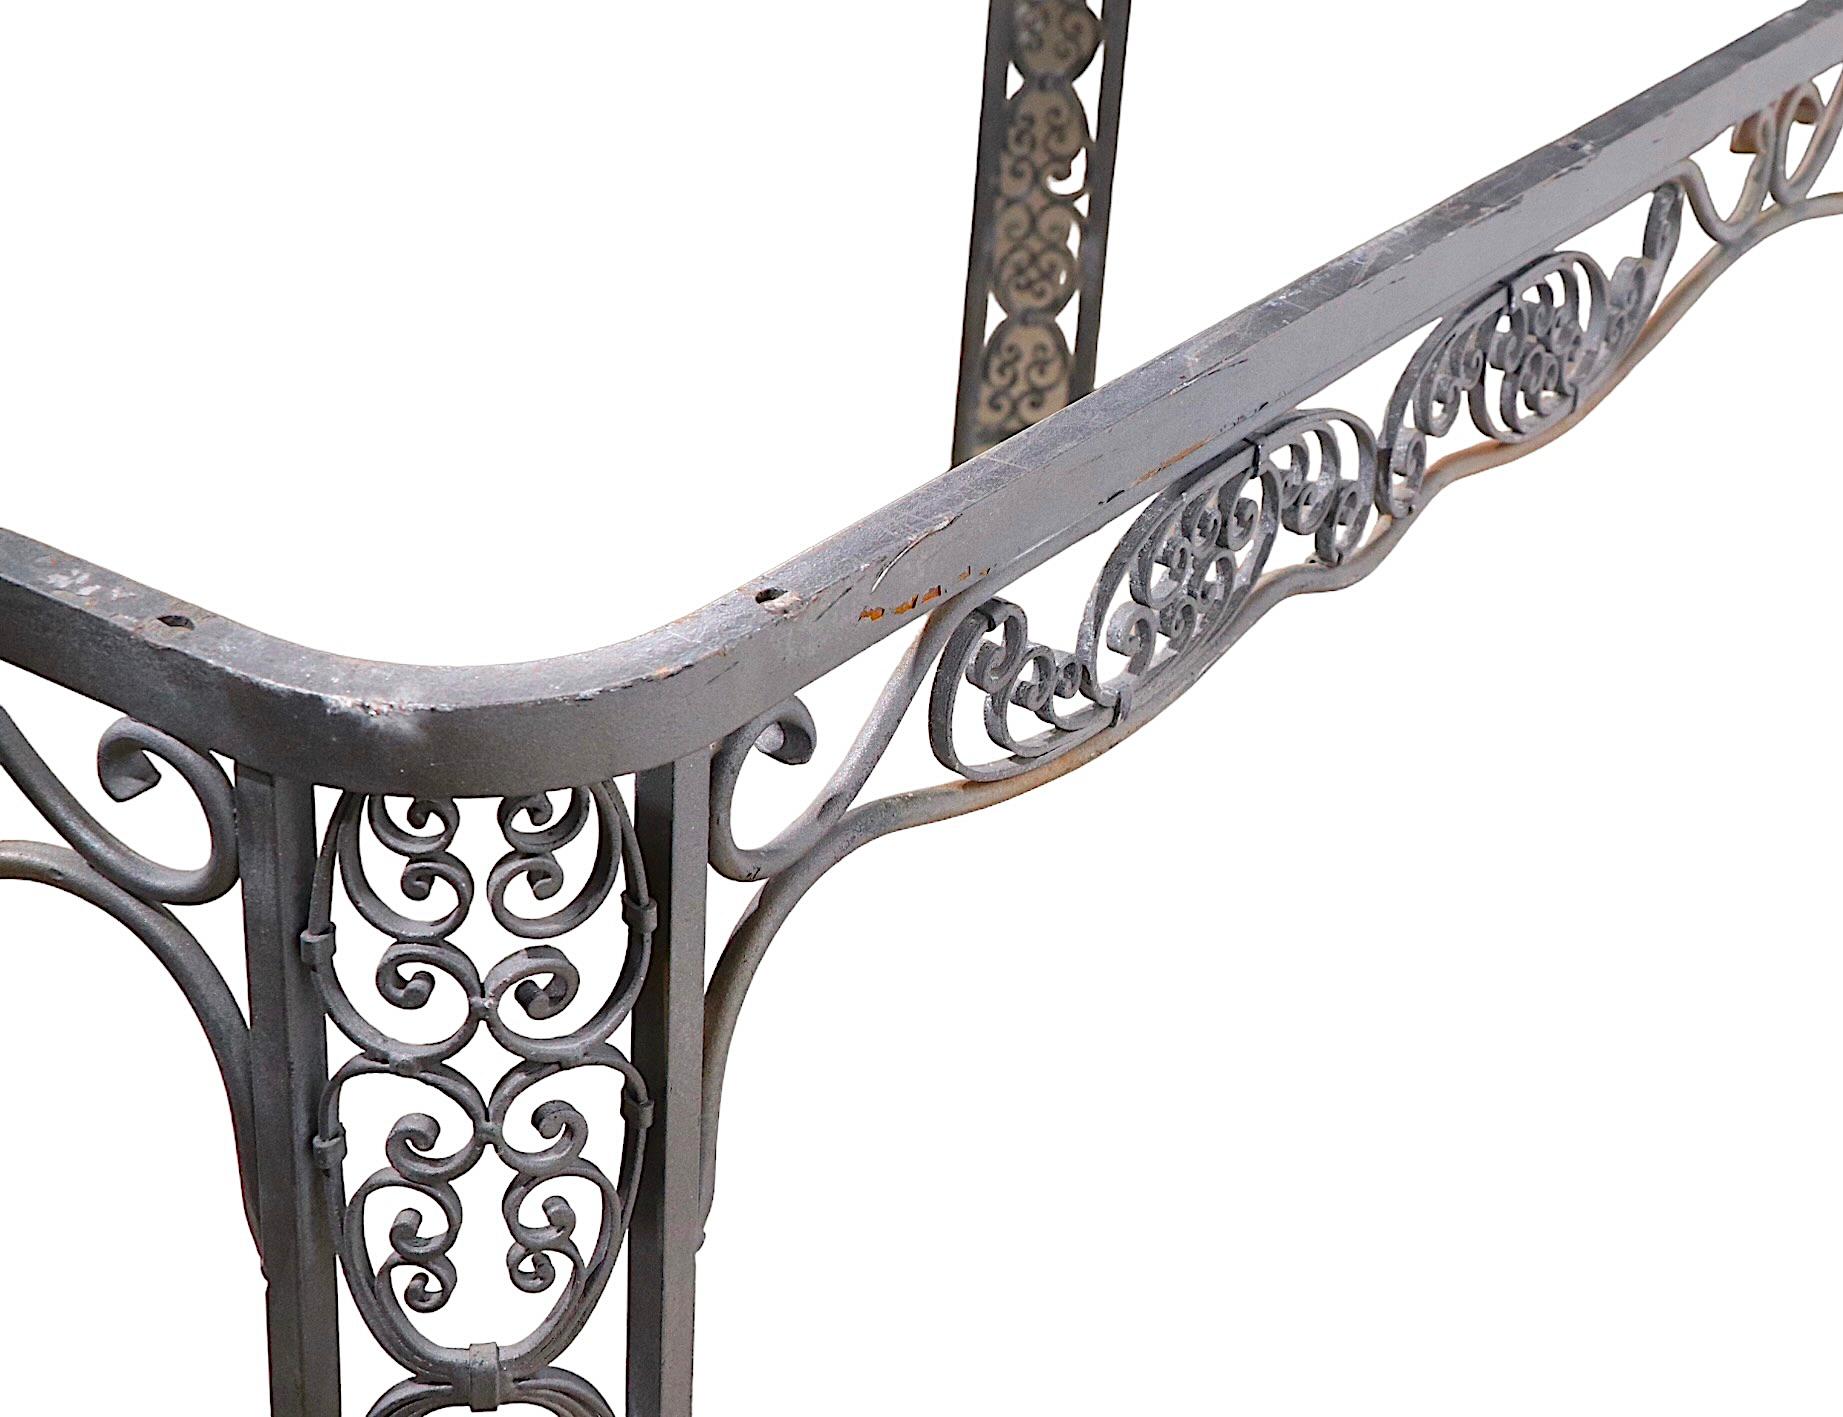 Stunning ornate wrought iron dining table b y Lee Woodard. The table features rounded corners, each having two legs, with elaborate scrollwork throughout the entire table frame. Charming and romantic without becoming saccharine or trite. This